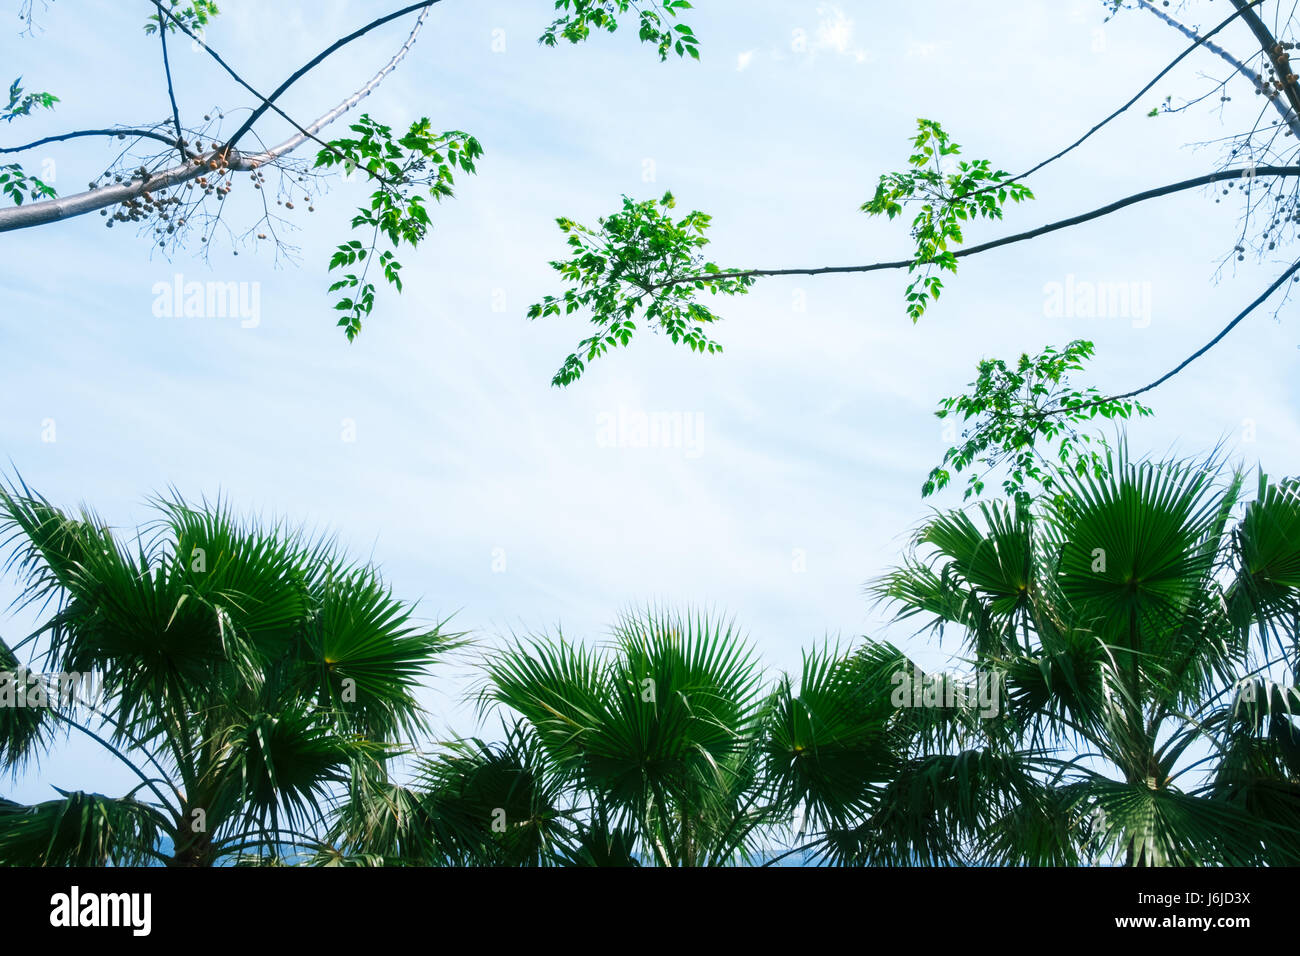 Palm tree silhouettes on blue sky background. Amazing summer scene on Mediterranean seacost Stock Photo